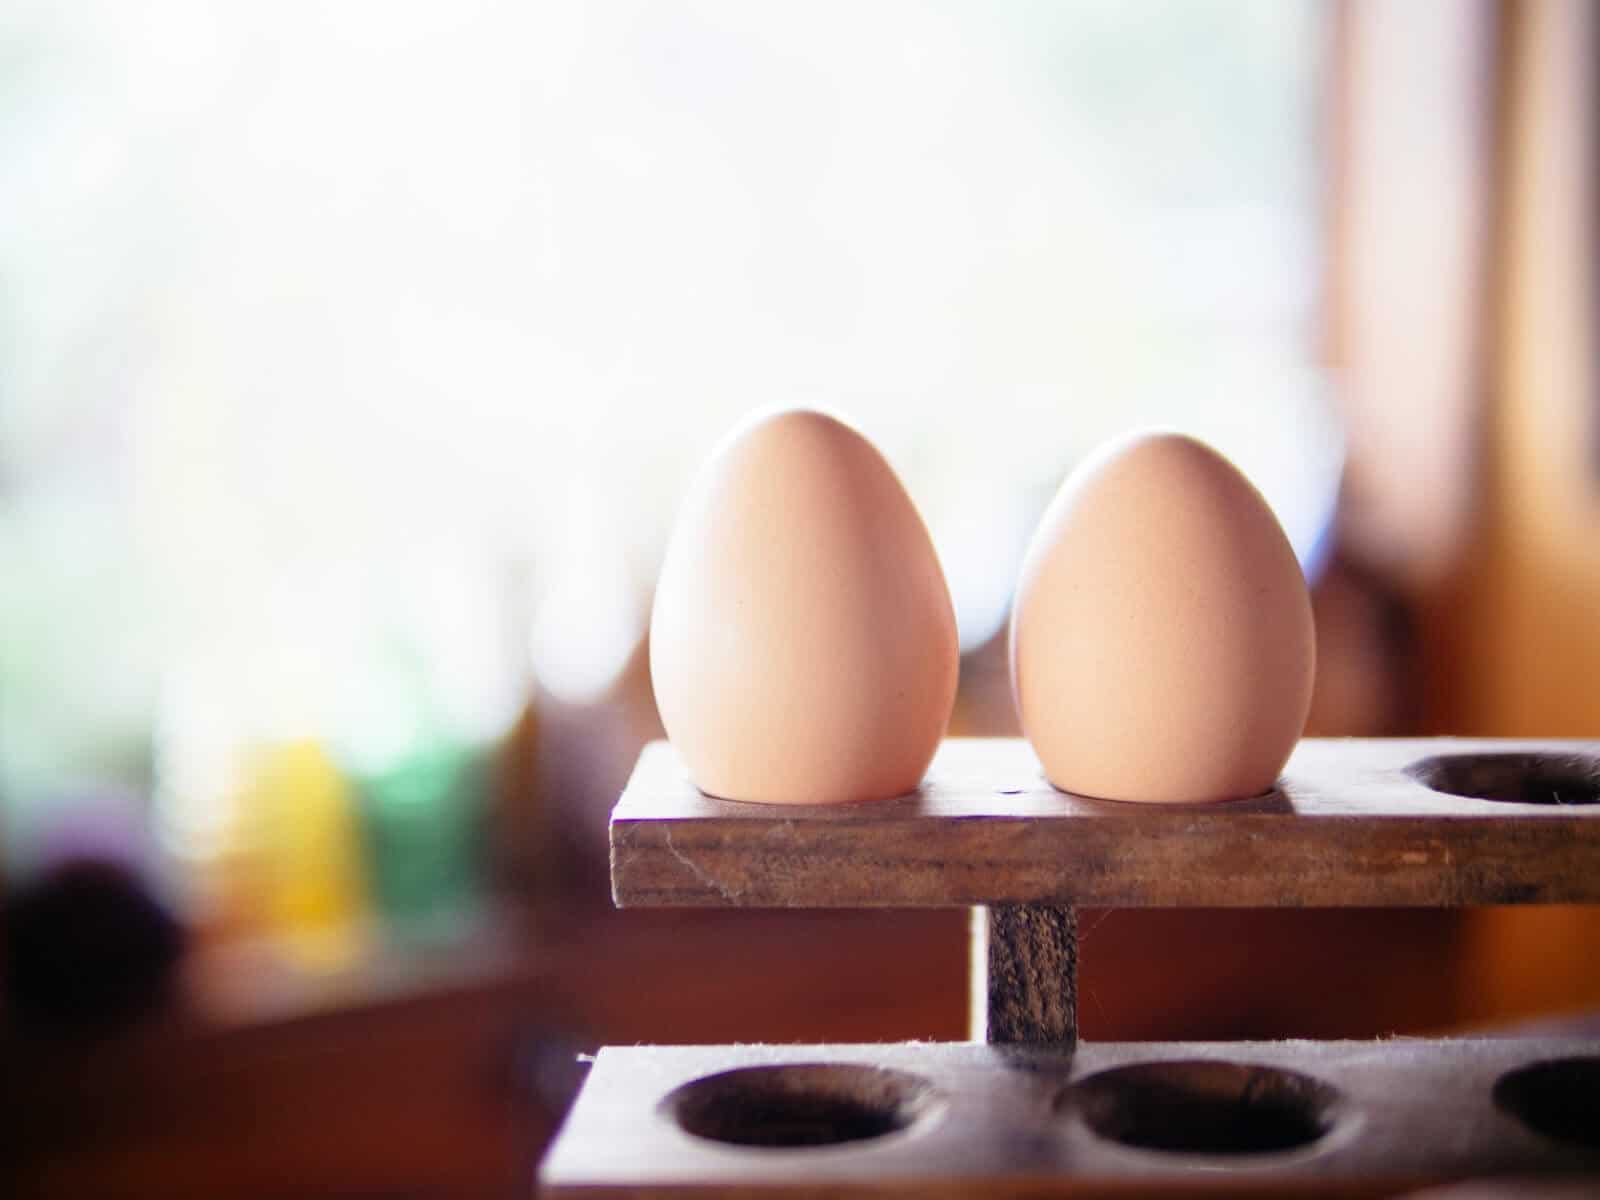 Eggs from backyard chickens and family farms don't need to be refrigerated